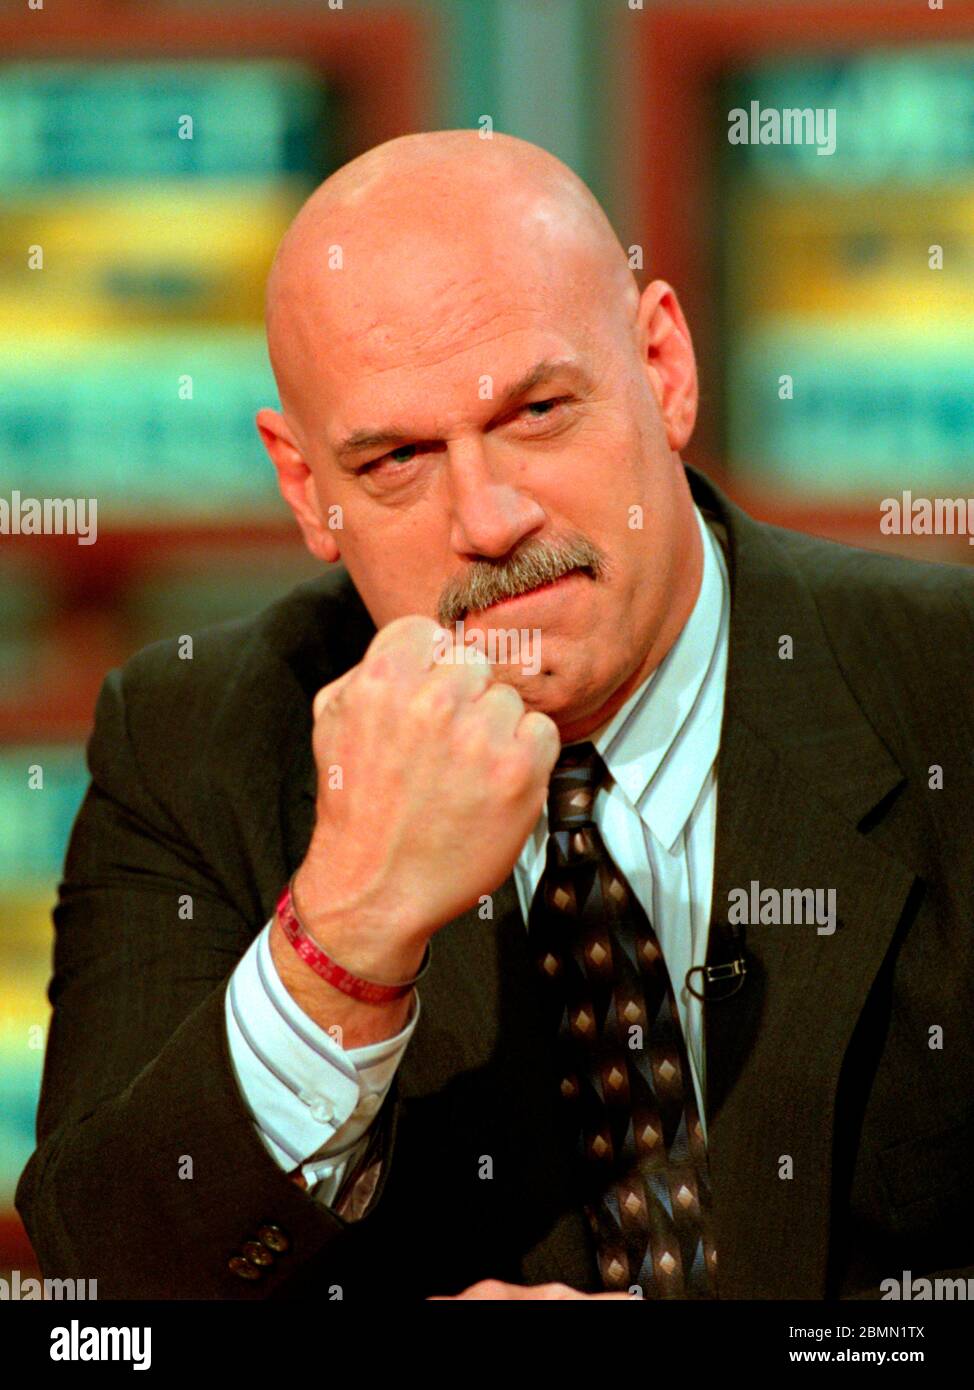 Minnesota Gov. Jesse Ventura, a former pro-wrestler holds up his fist during the Sunday political talk show Meet the Press on NBC Television February 21, 1999 in Washington, DC. Stock Photo